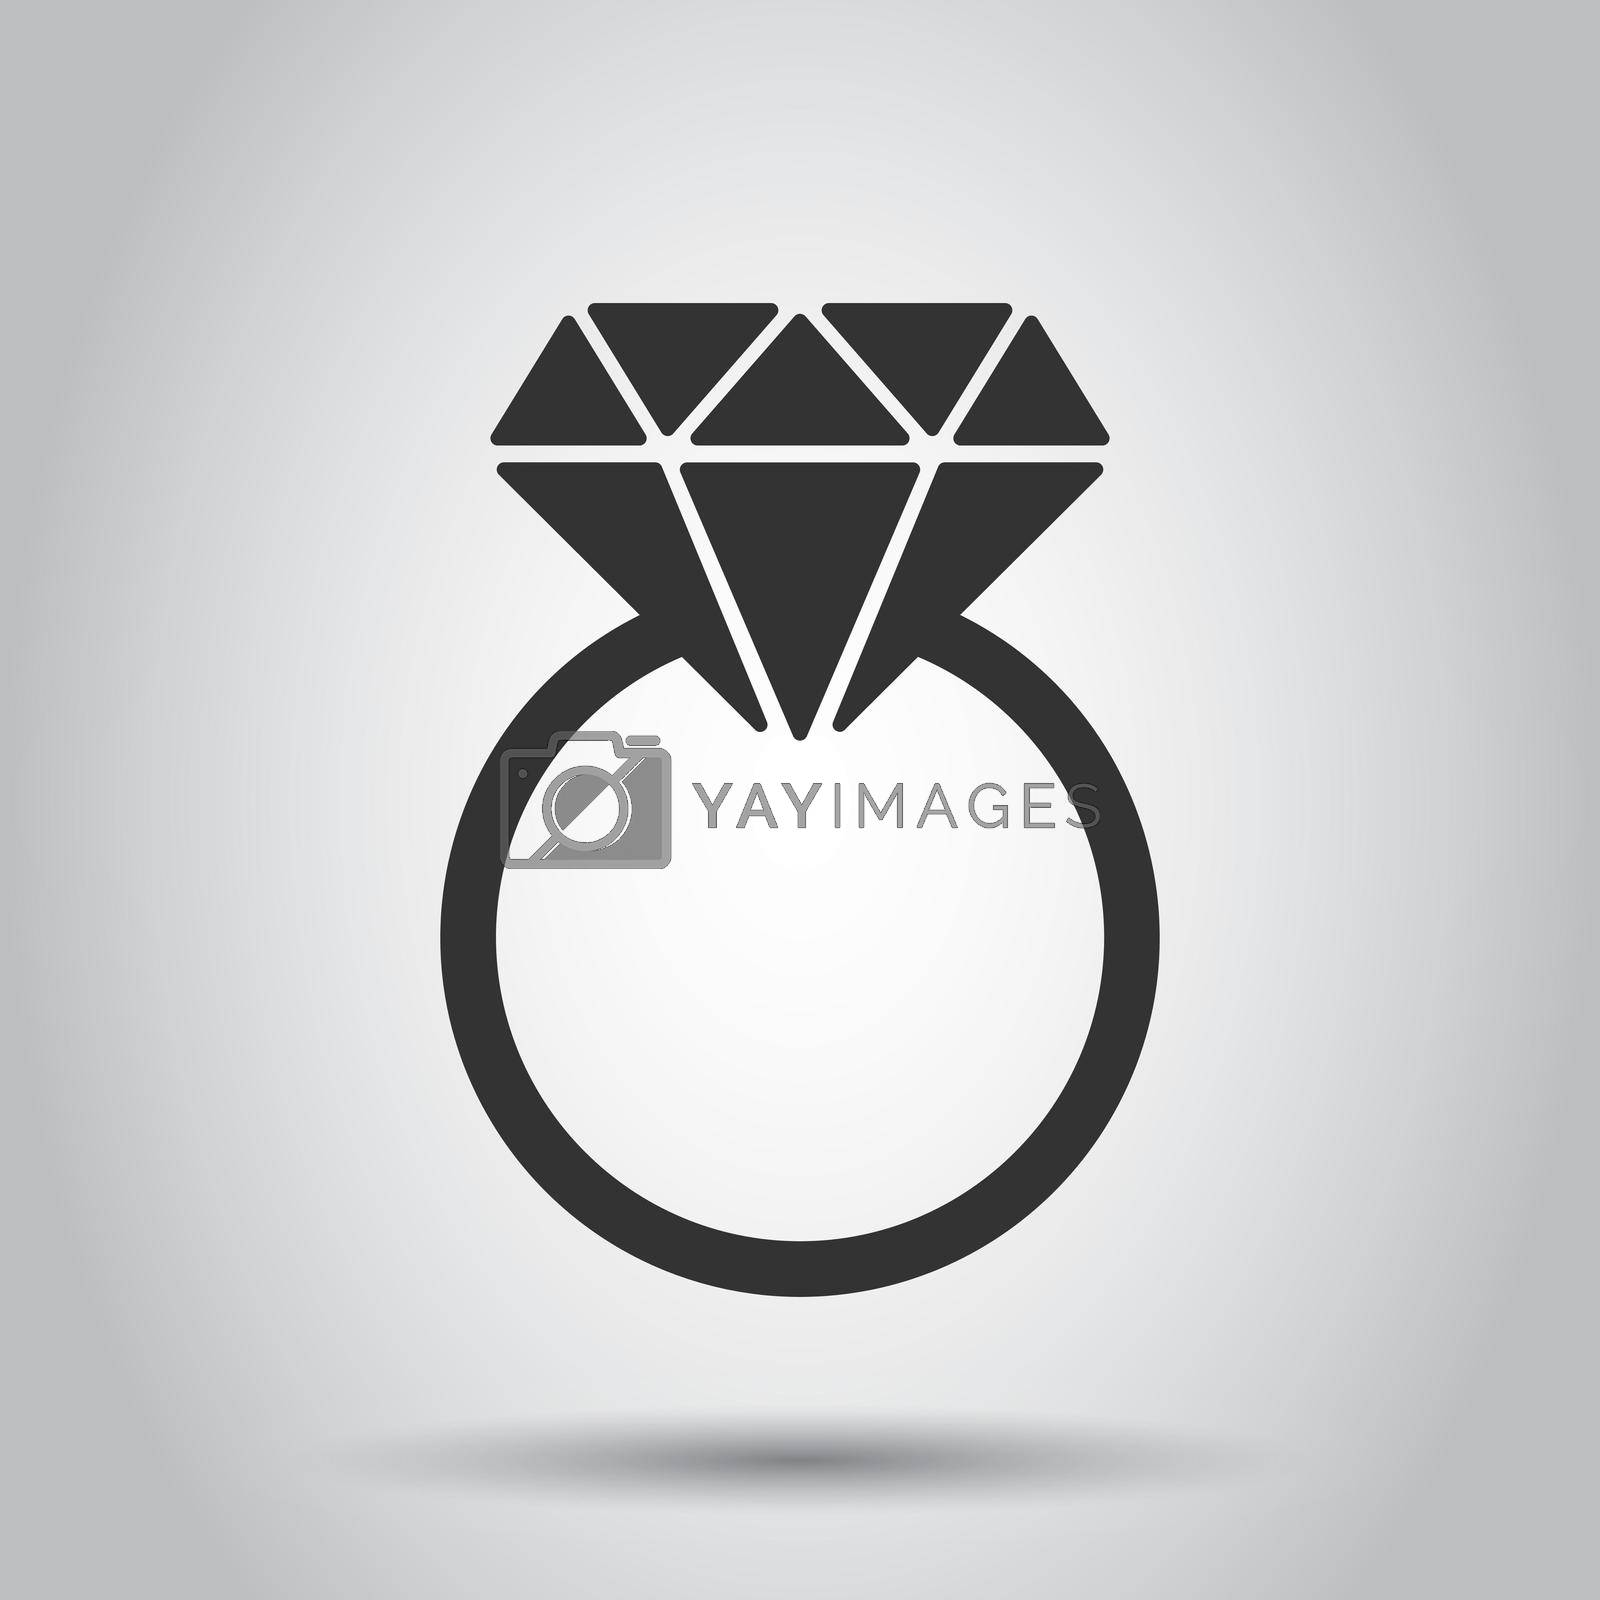 Engagement ring with diamond vector icon in flat style. Wedding jewelery ring illustration on white background. Romance relationship concept.